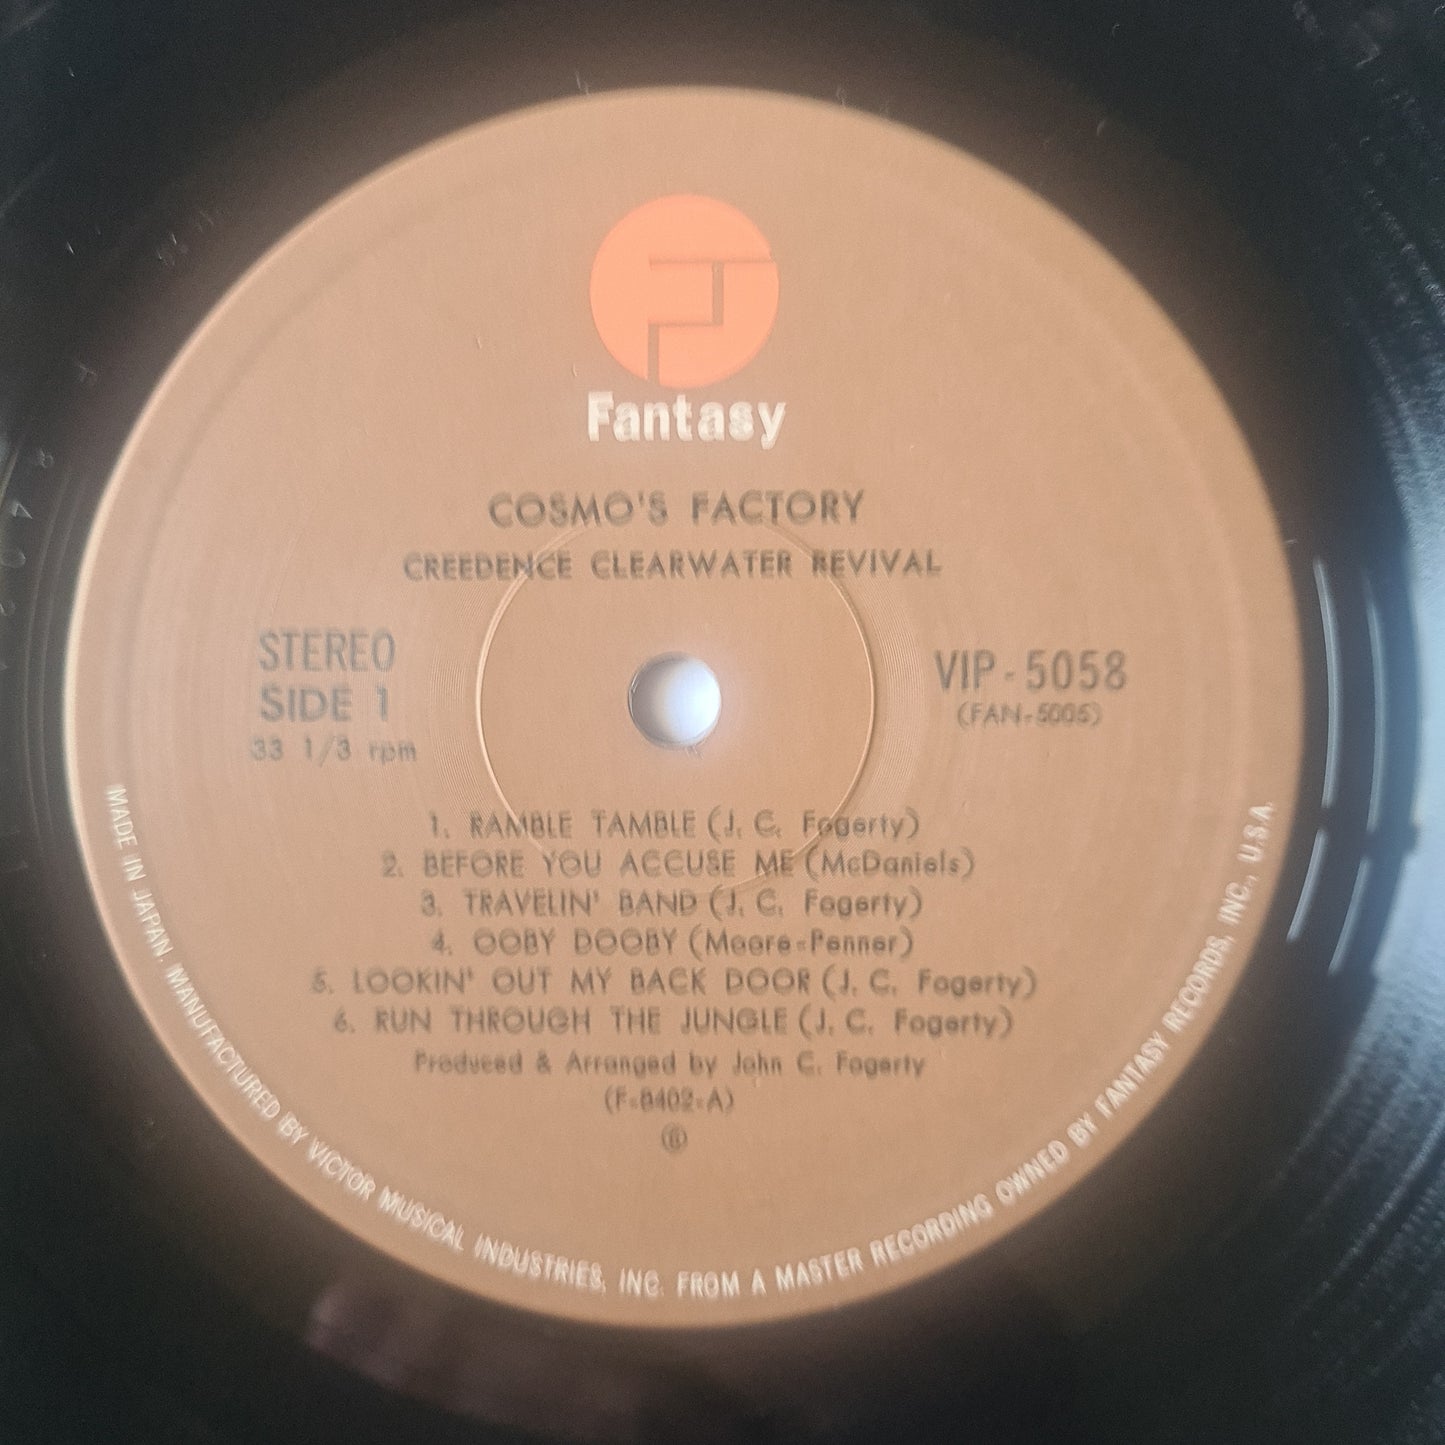 Creedence Clearwater Revival – Cosmo's Factory - 1978 Pressing - Vinyl Record